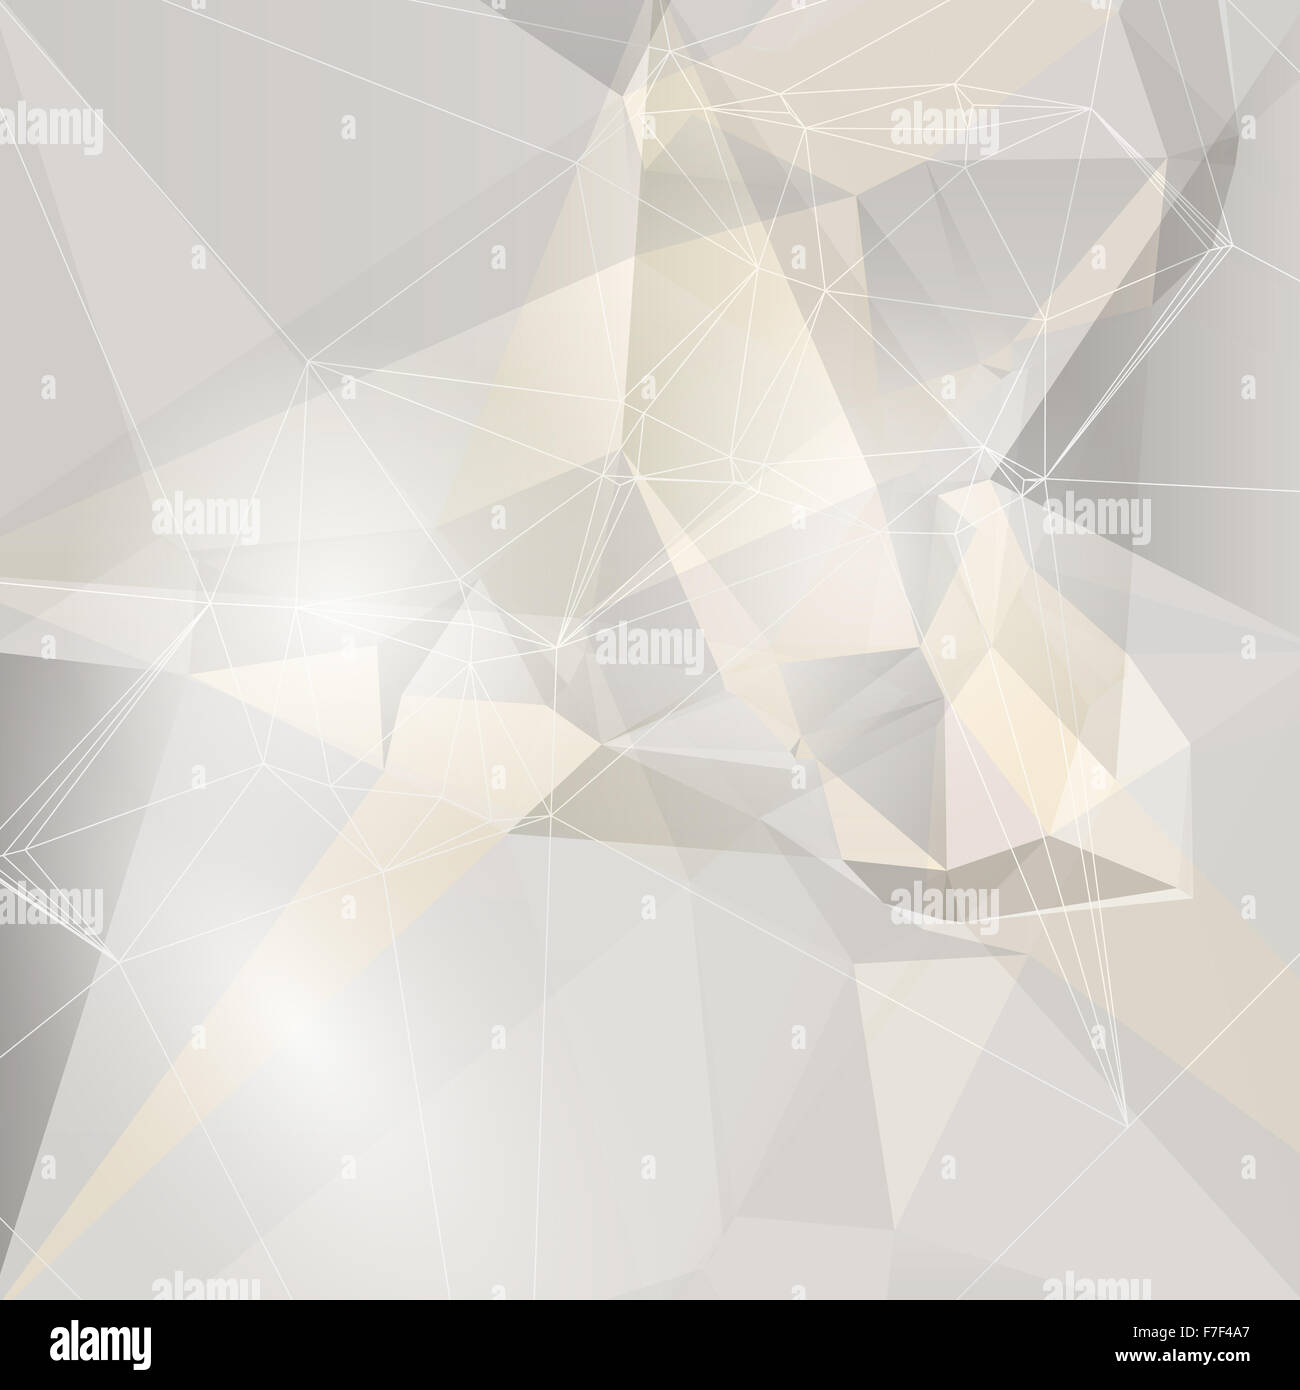 Abstract background with a low poly design Stock Photo